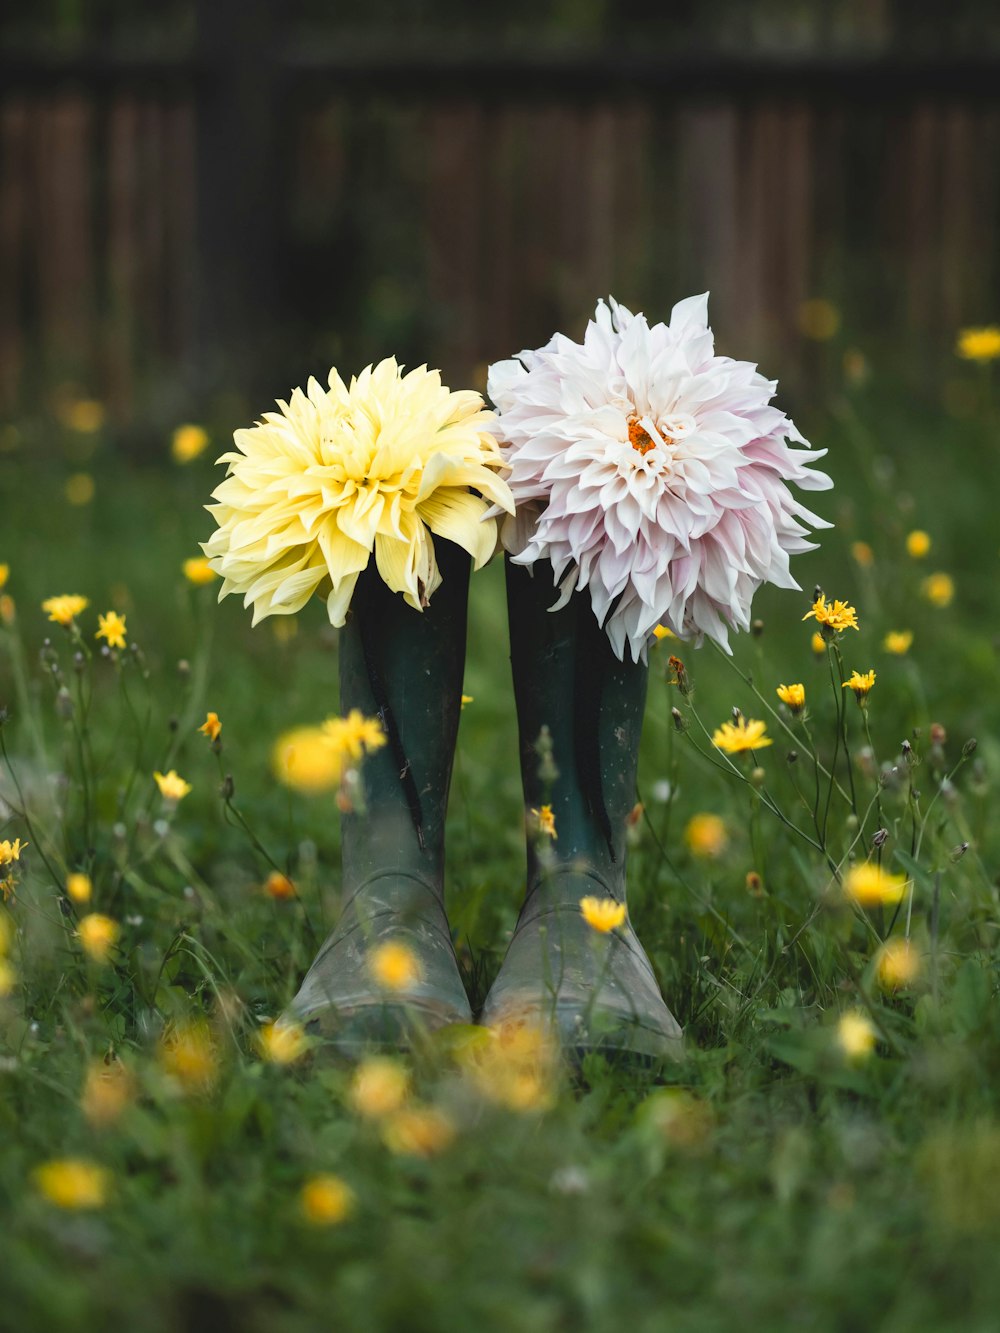 a pair of rubber boots with flowers in them